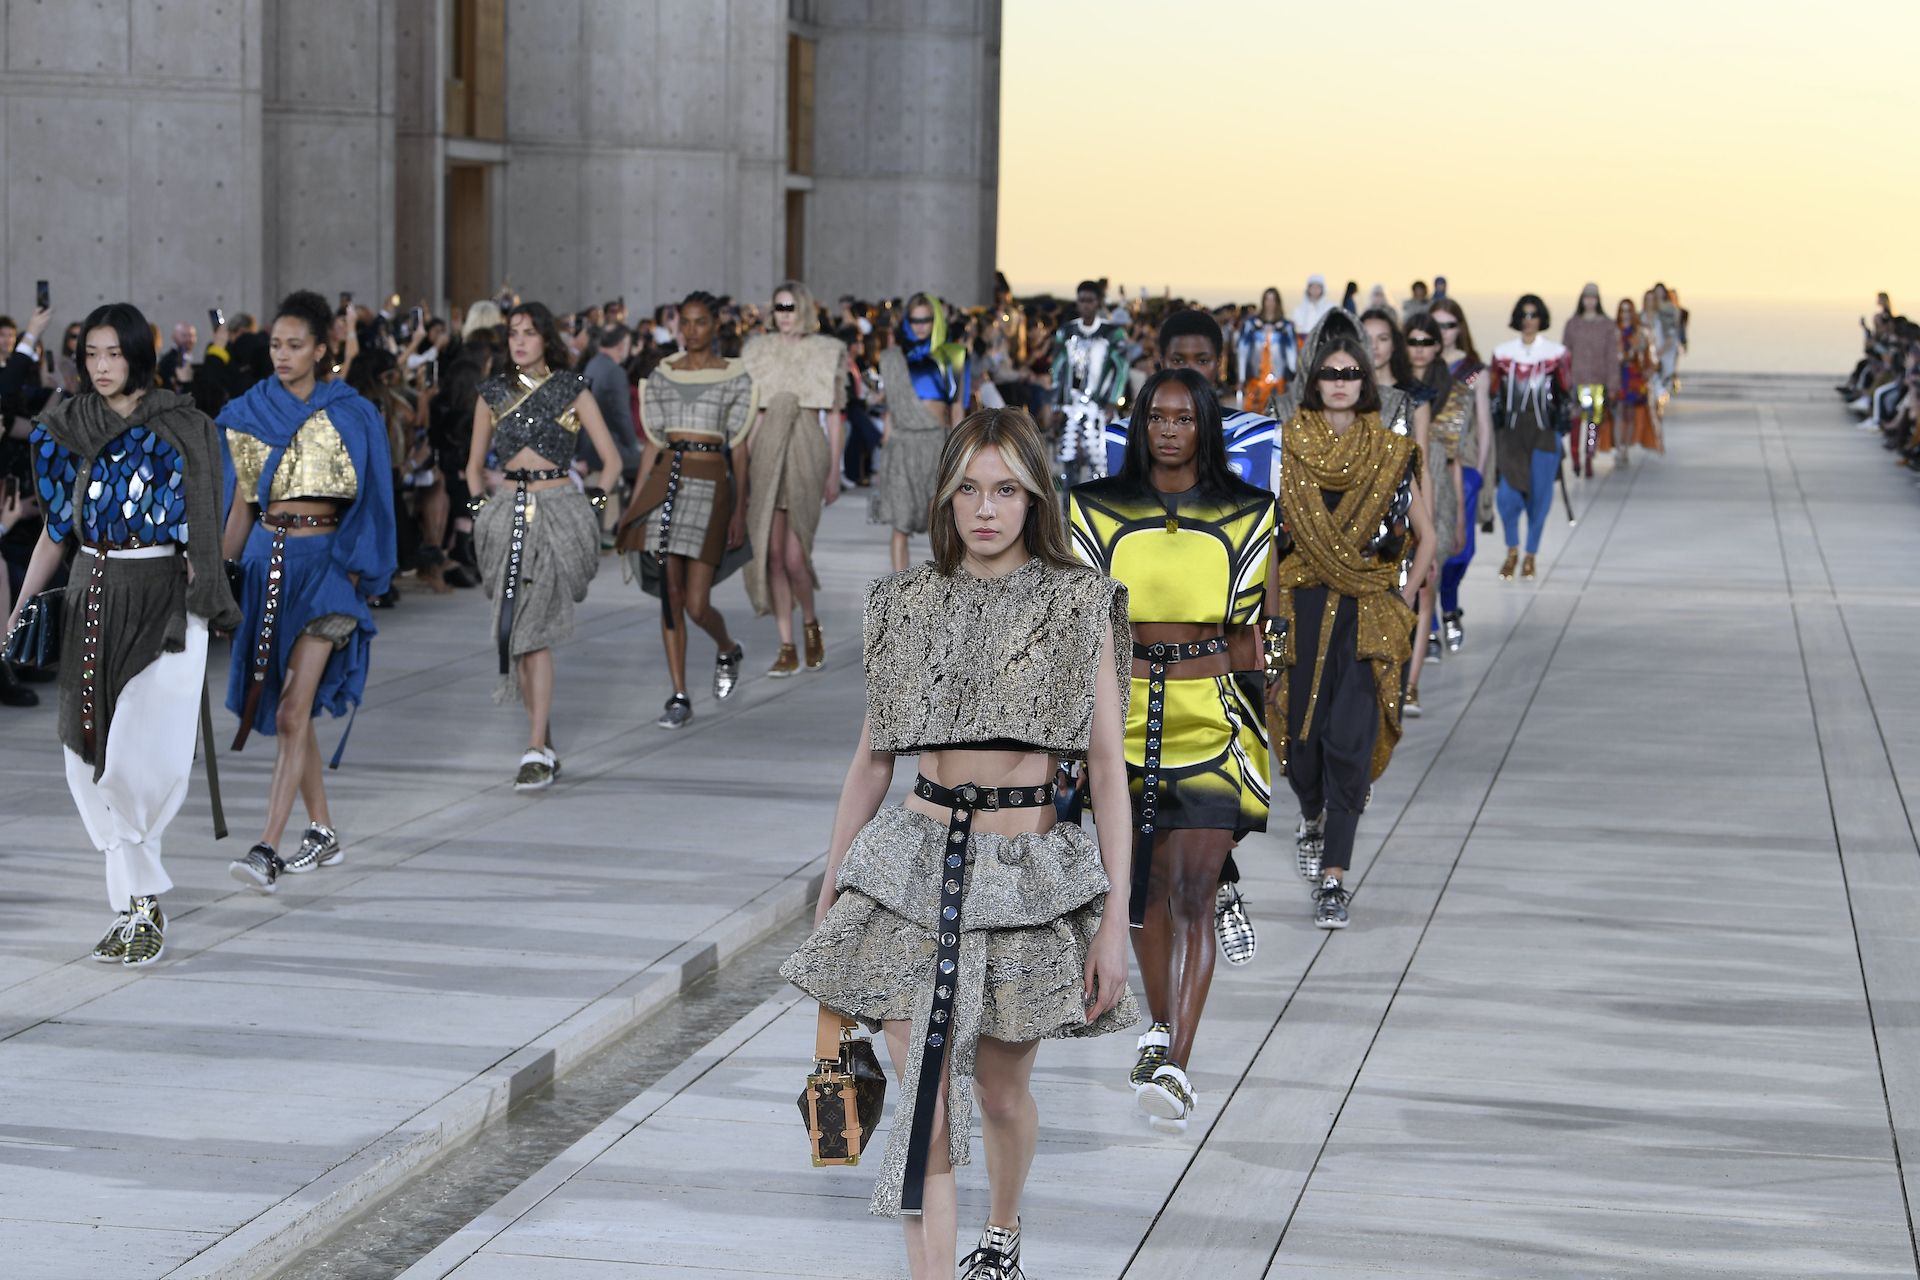 Louis Vuitton's Cruise Collection pays an ode to New York's skyline